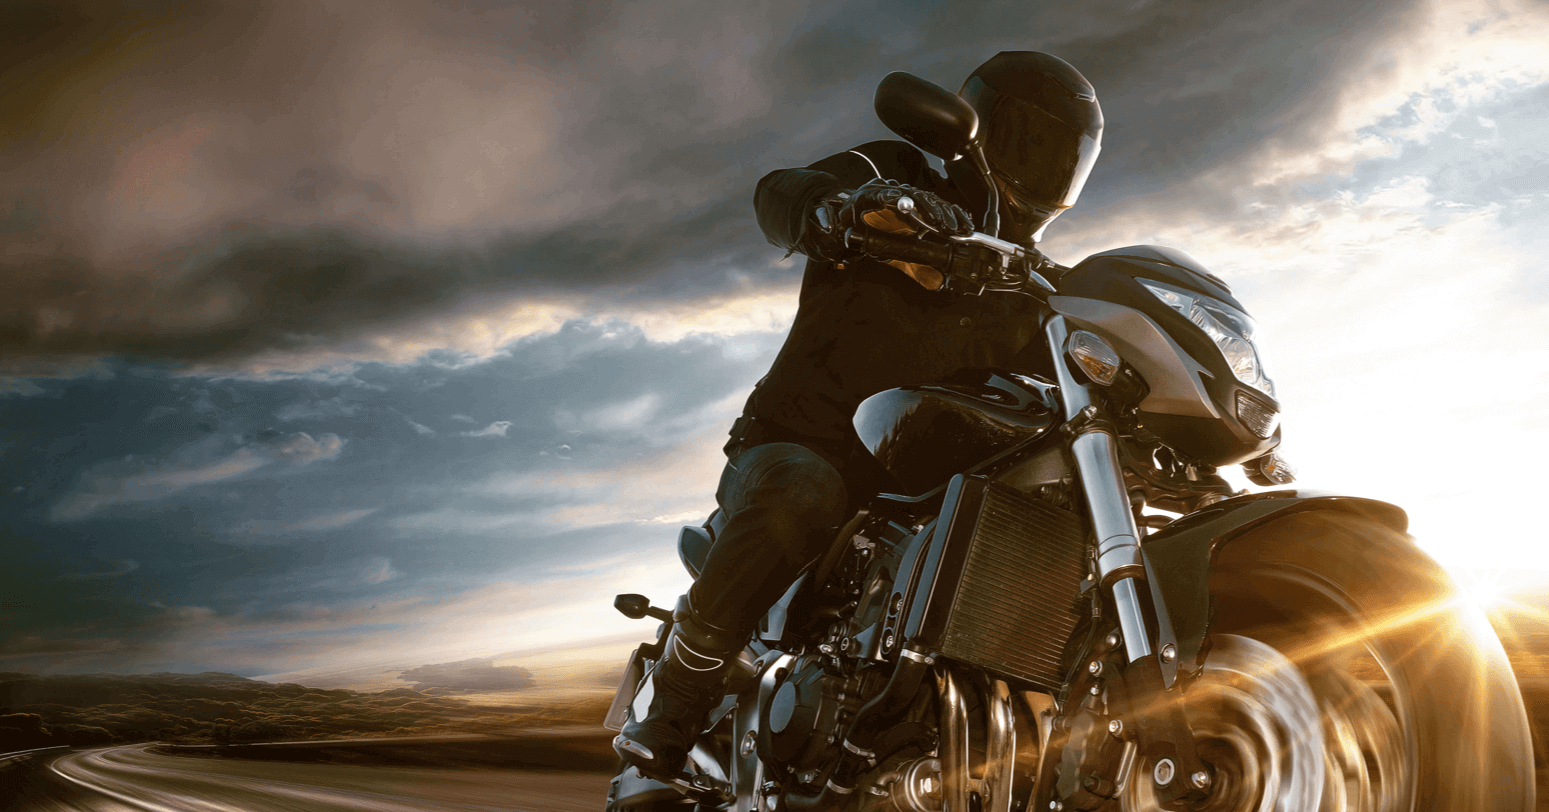 motorcyclist in black riding gear on a motorcycle with the sun setting behind